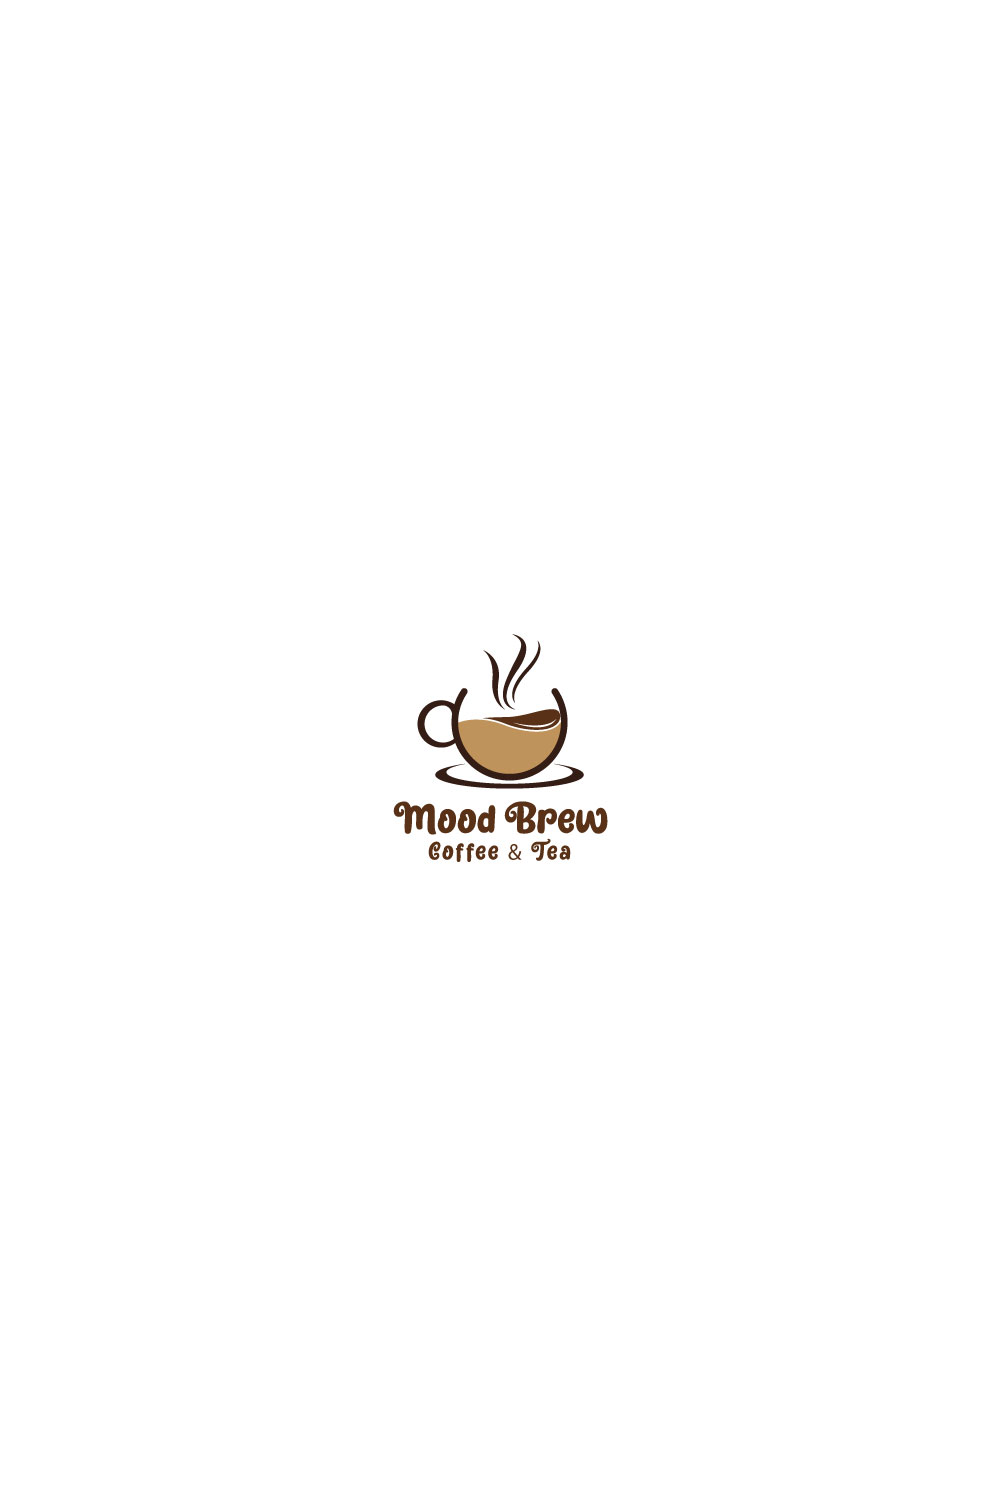 Initial coffee shop logo design vector template pinterest preview image.